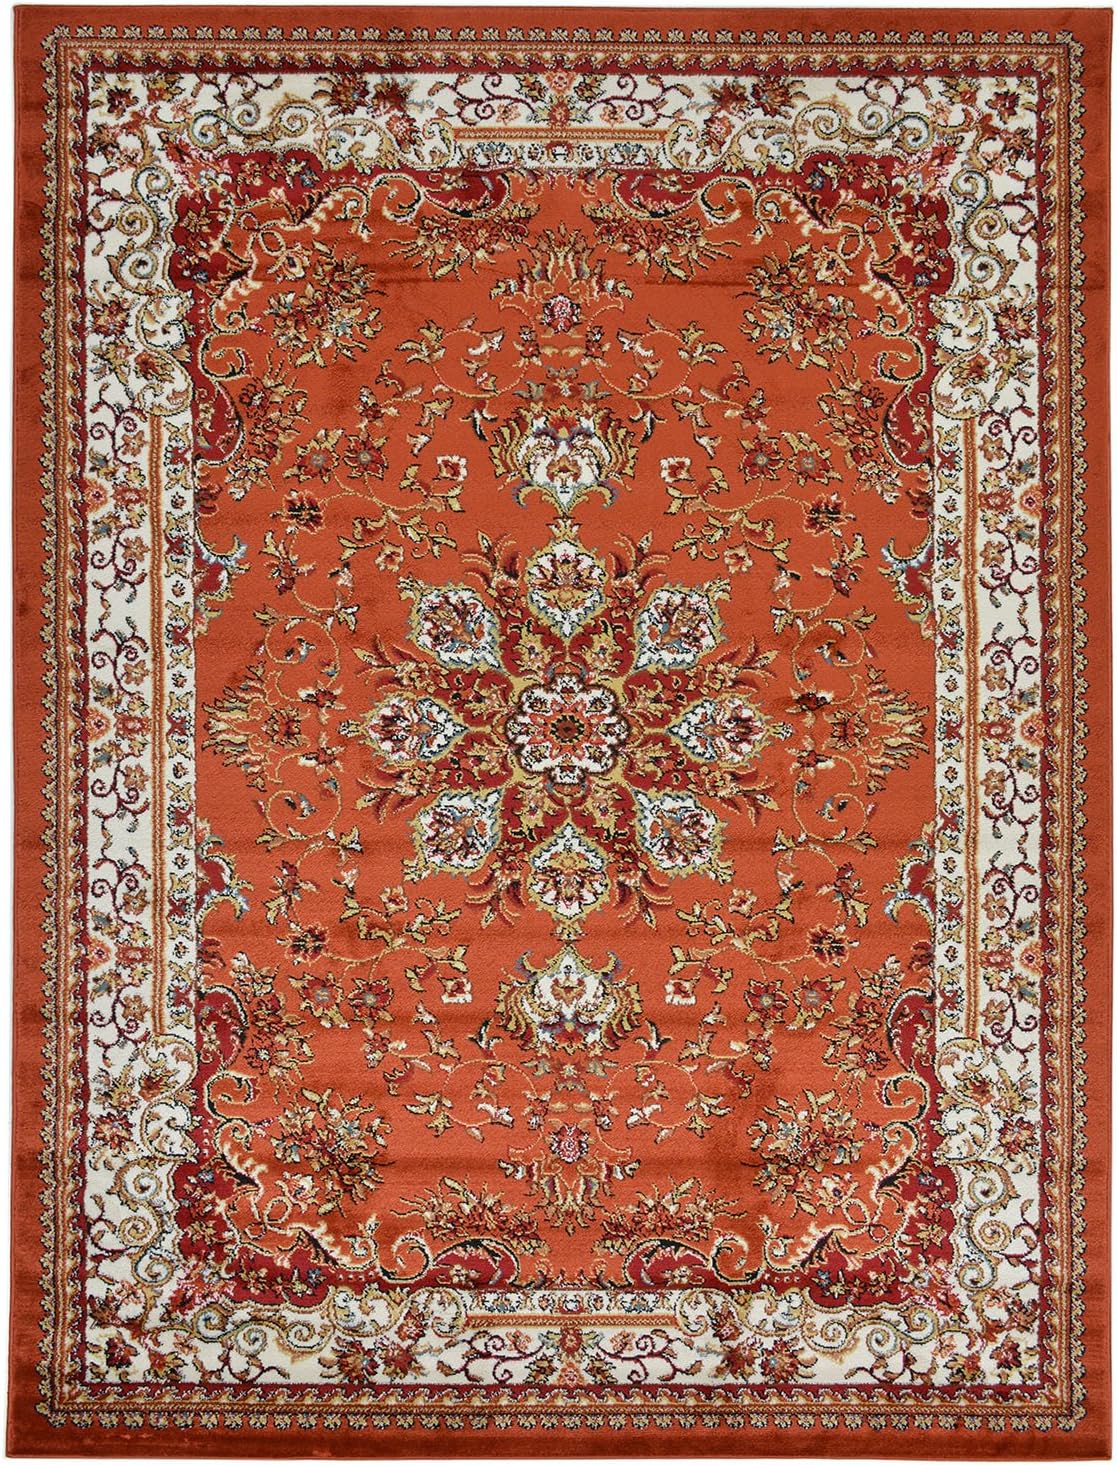 Isfahan Persian Traditional Design Area Rug Rugs (Black, 5' 3" x 7' 1")